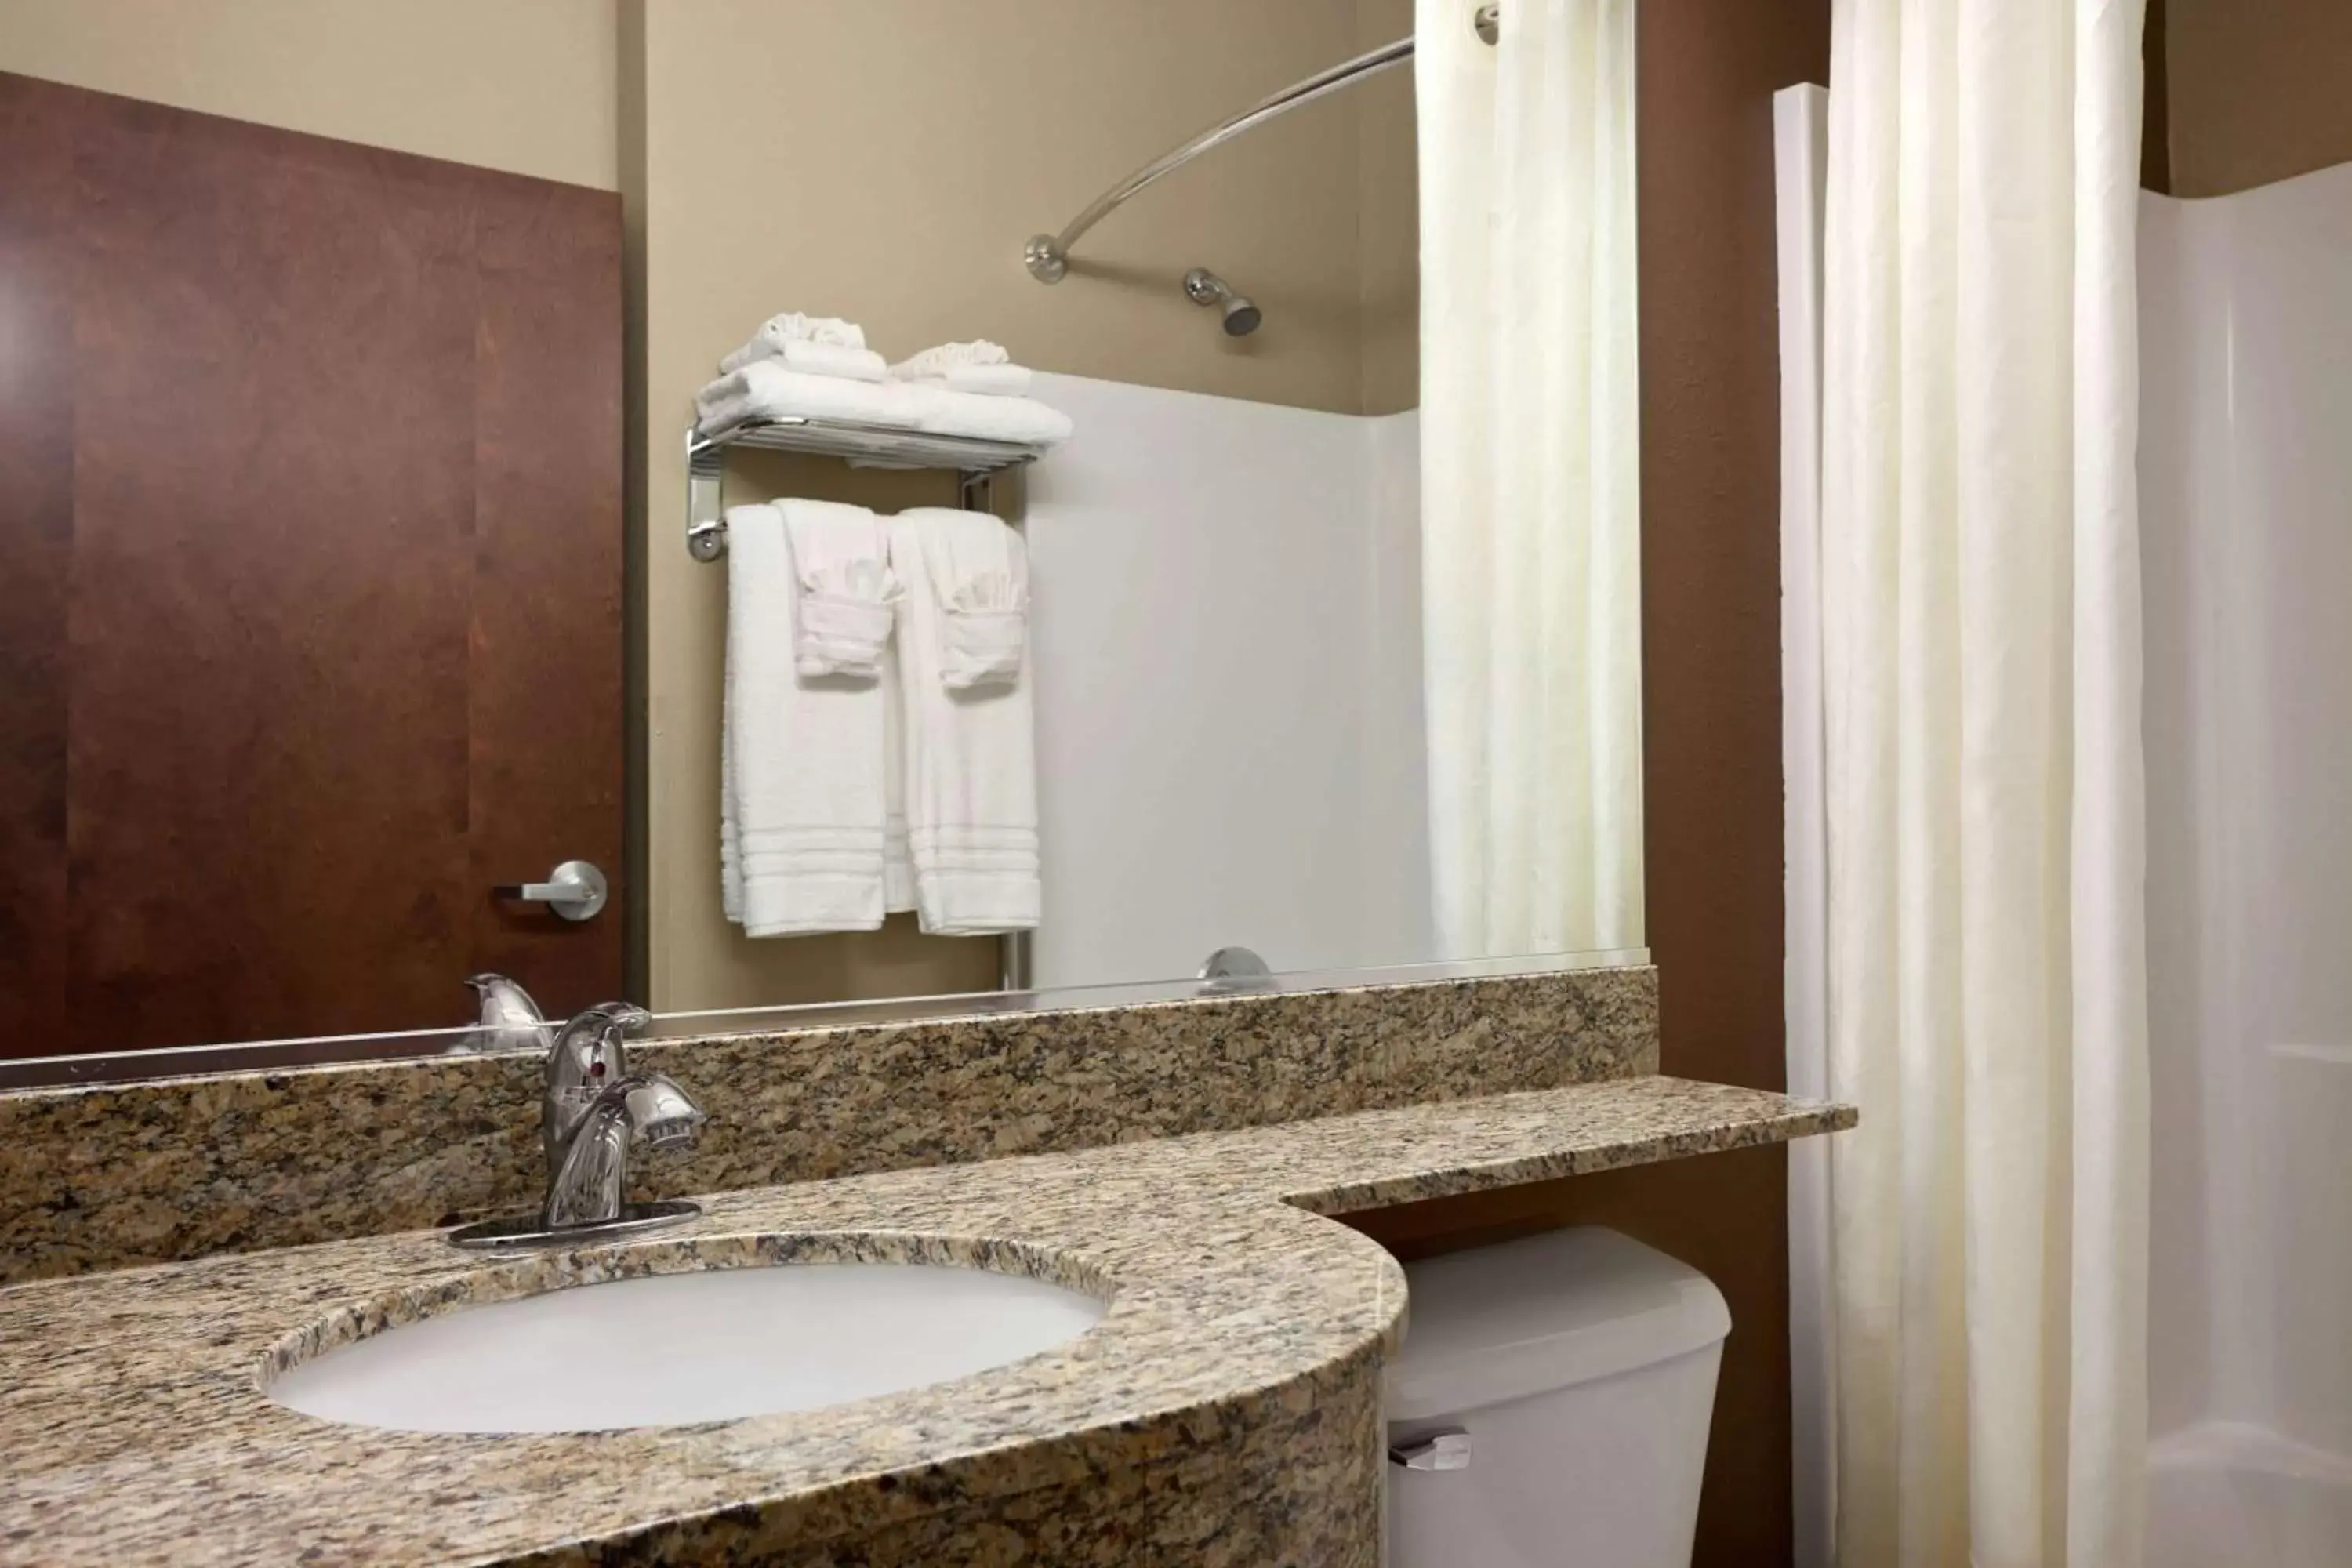 TV and multimedia, Bathroom in Microtel Inn & Suites - St Clairsville